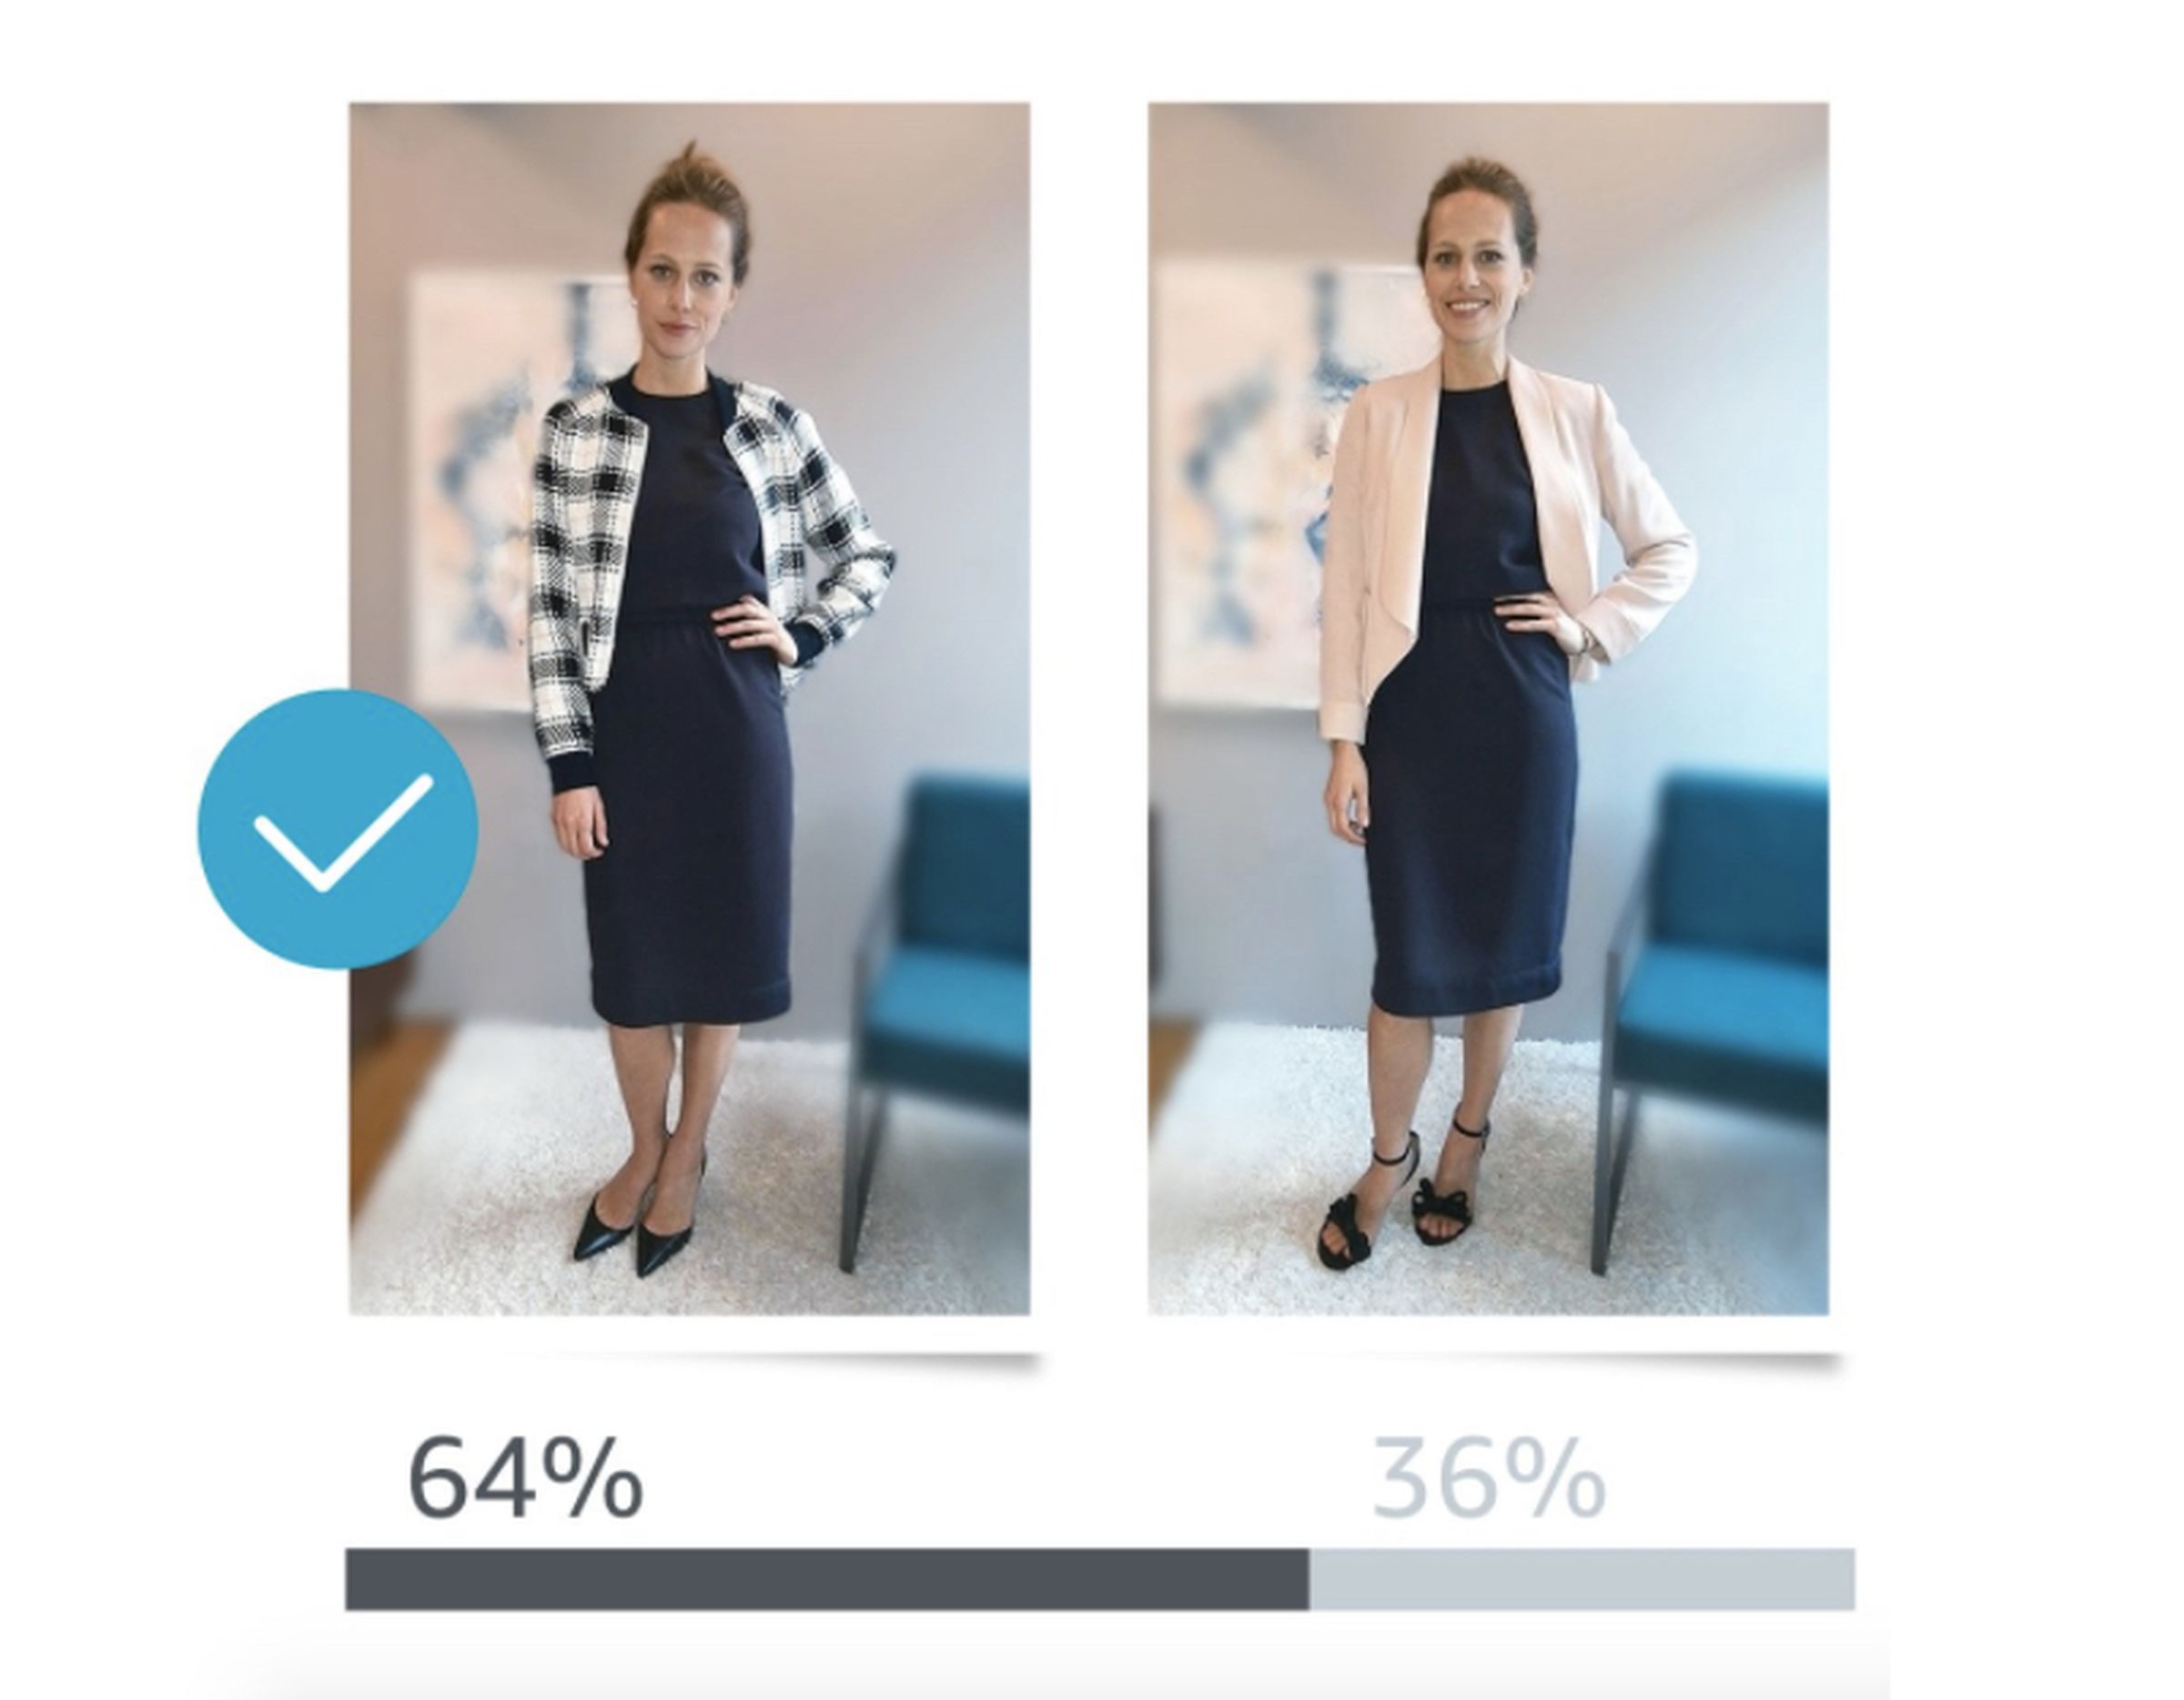 The Echo Look’s primary function is to give users style advice, and let them compare looks.